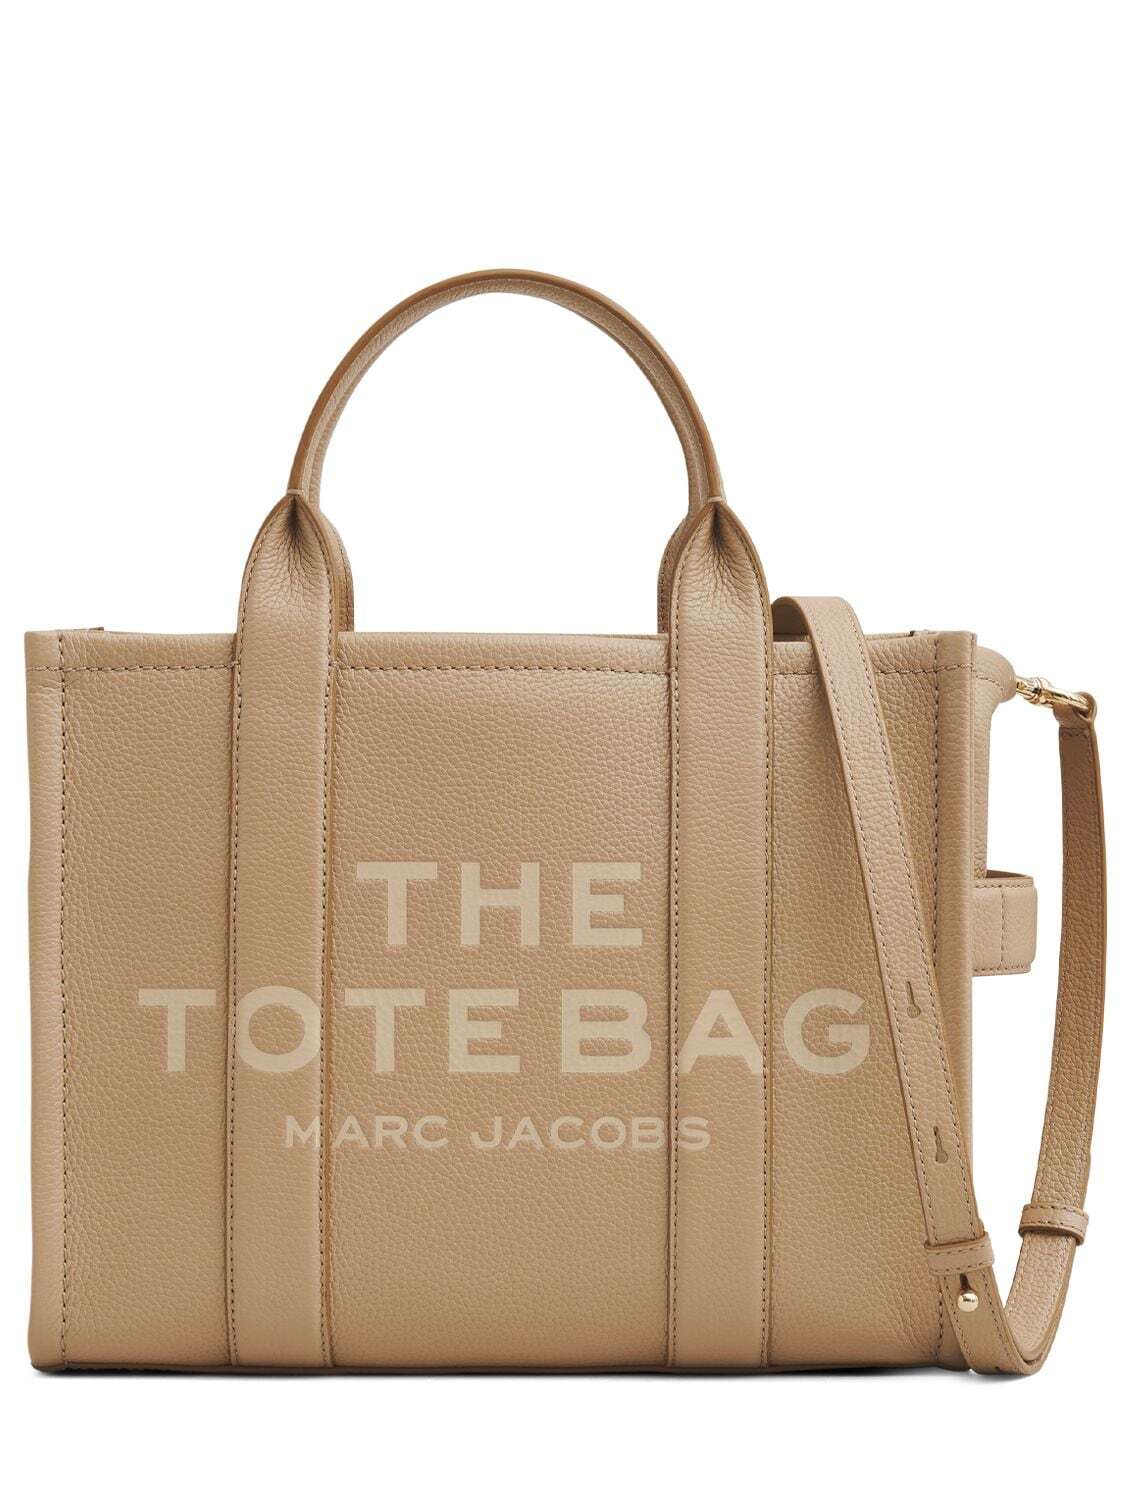 MARC JACOBS The Medium Tote Leather Bag in camel